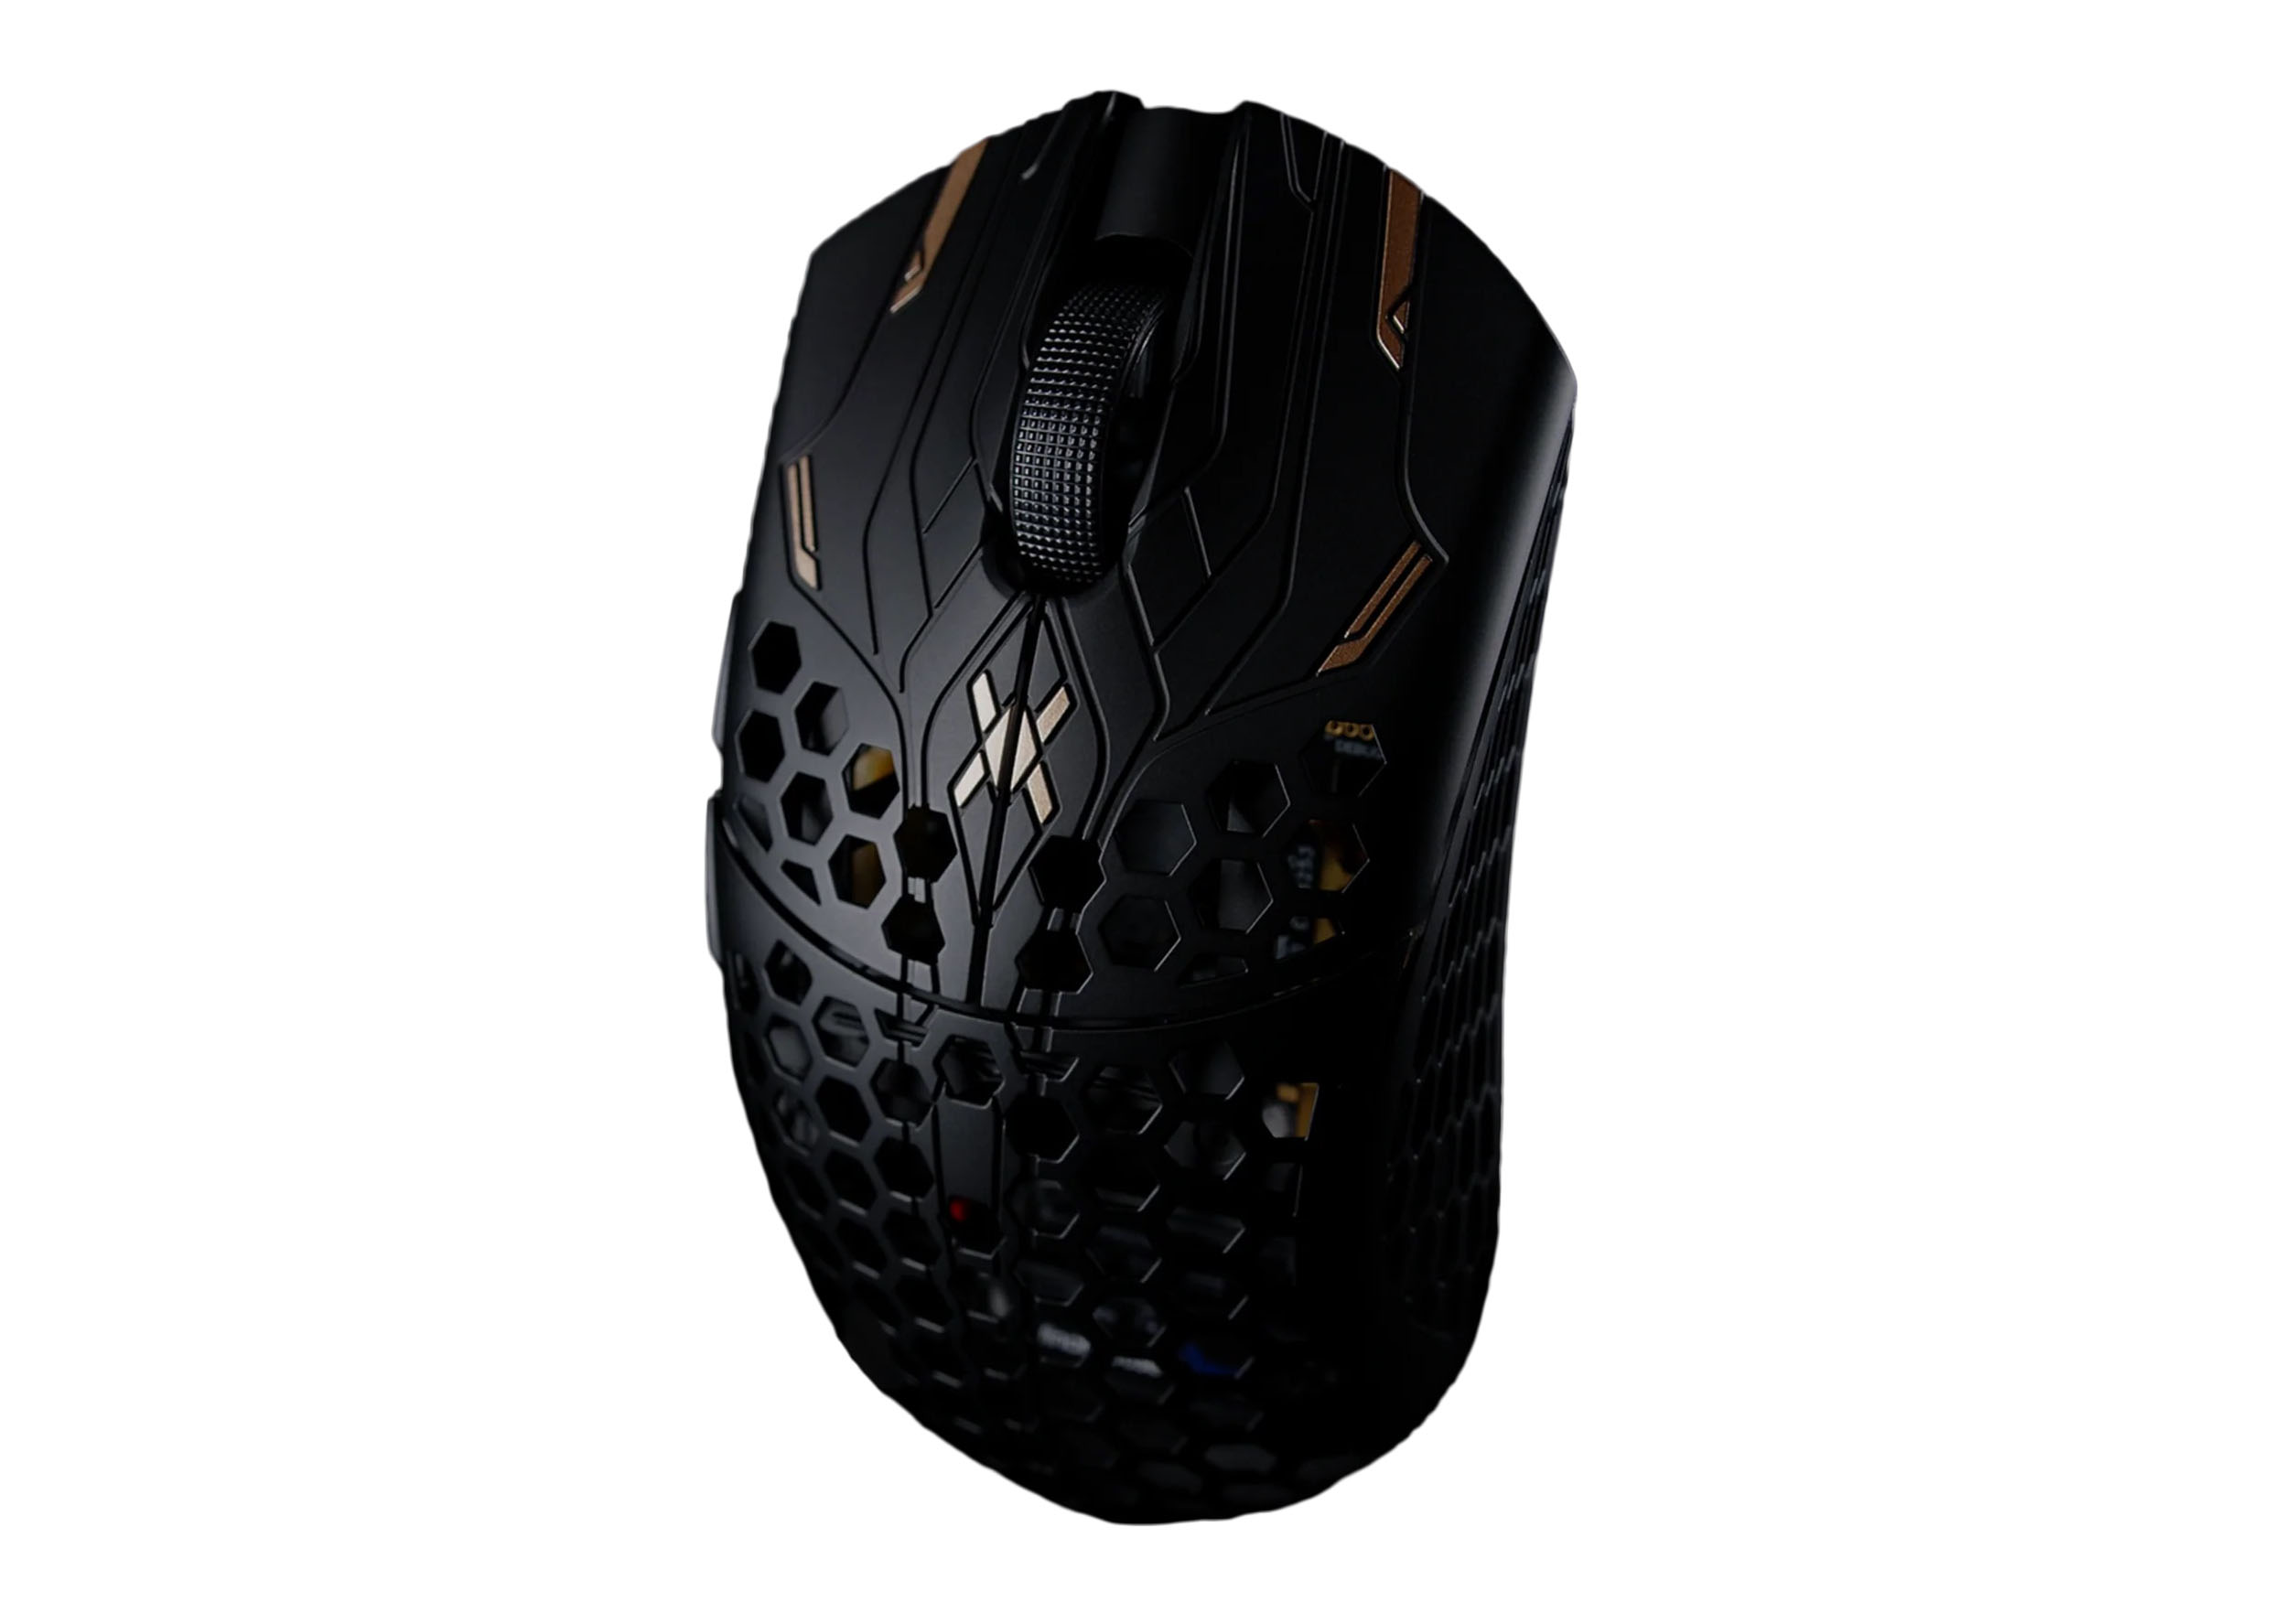 Finalmouse UltralightX Guardian Wireless Mouse 126 x 59mm Black/Gold